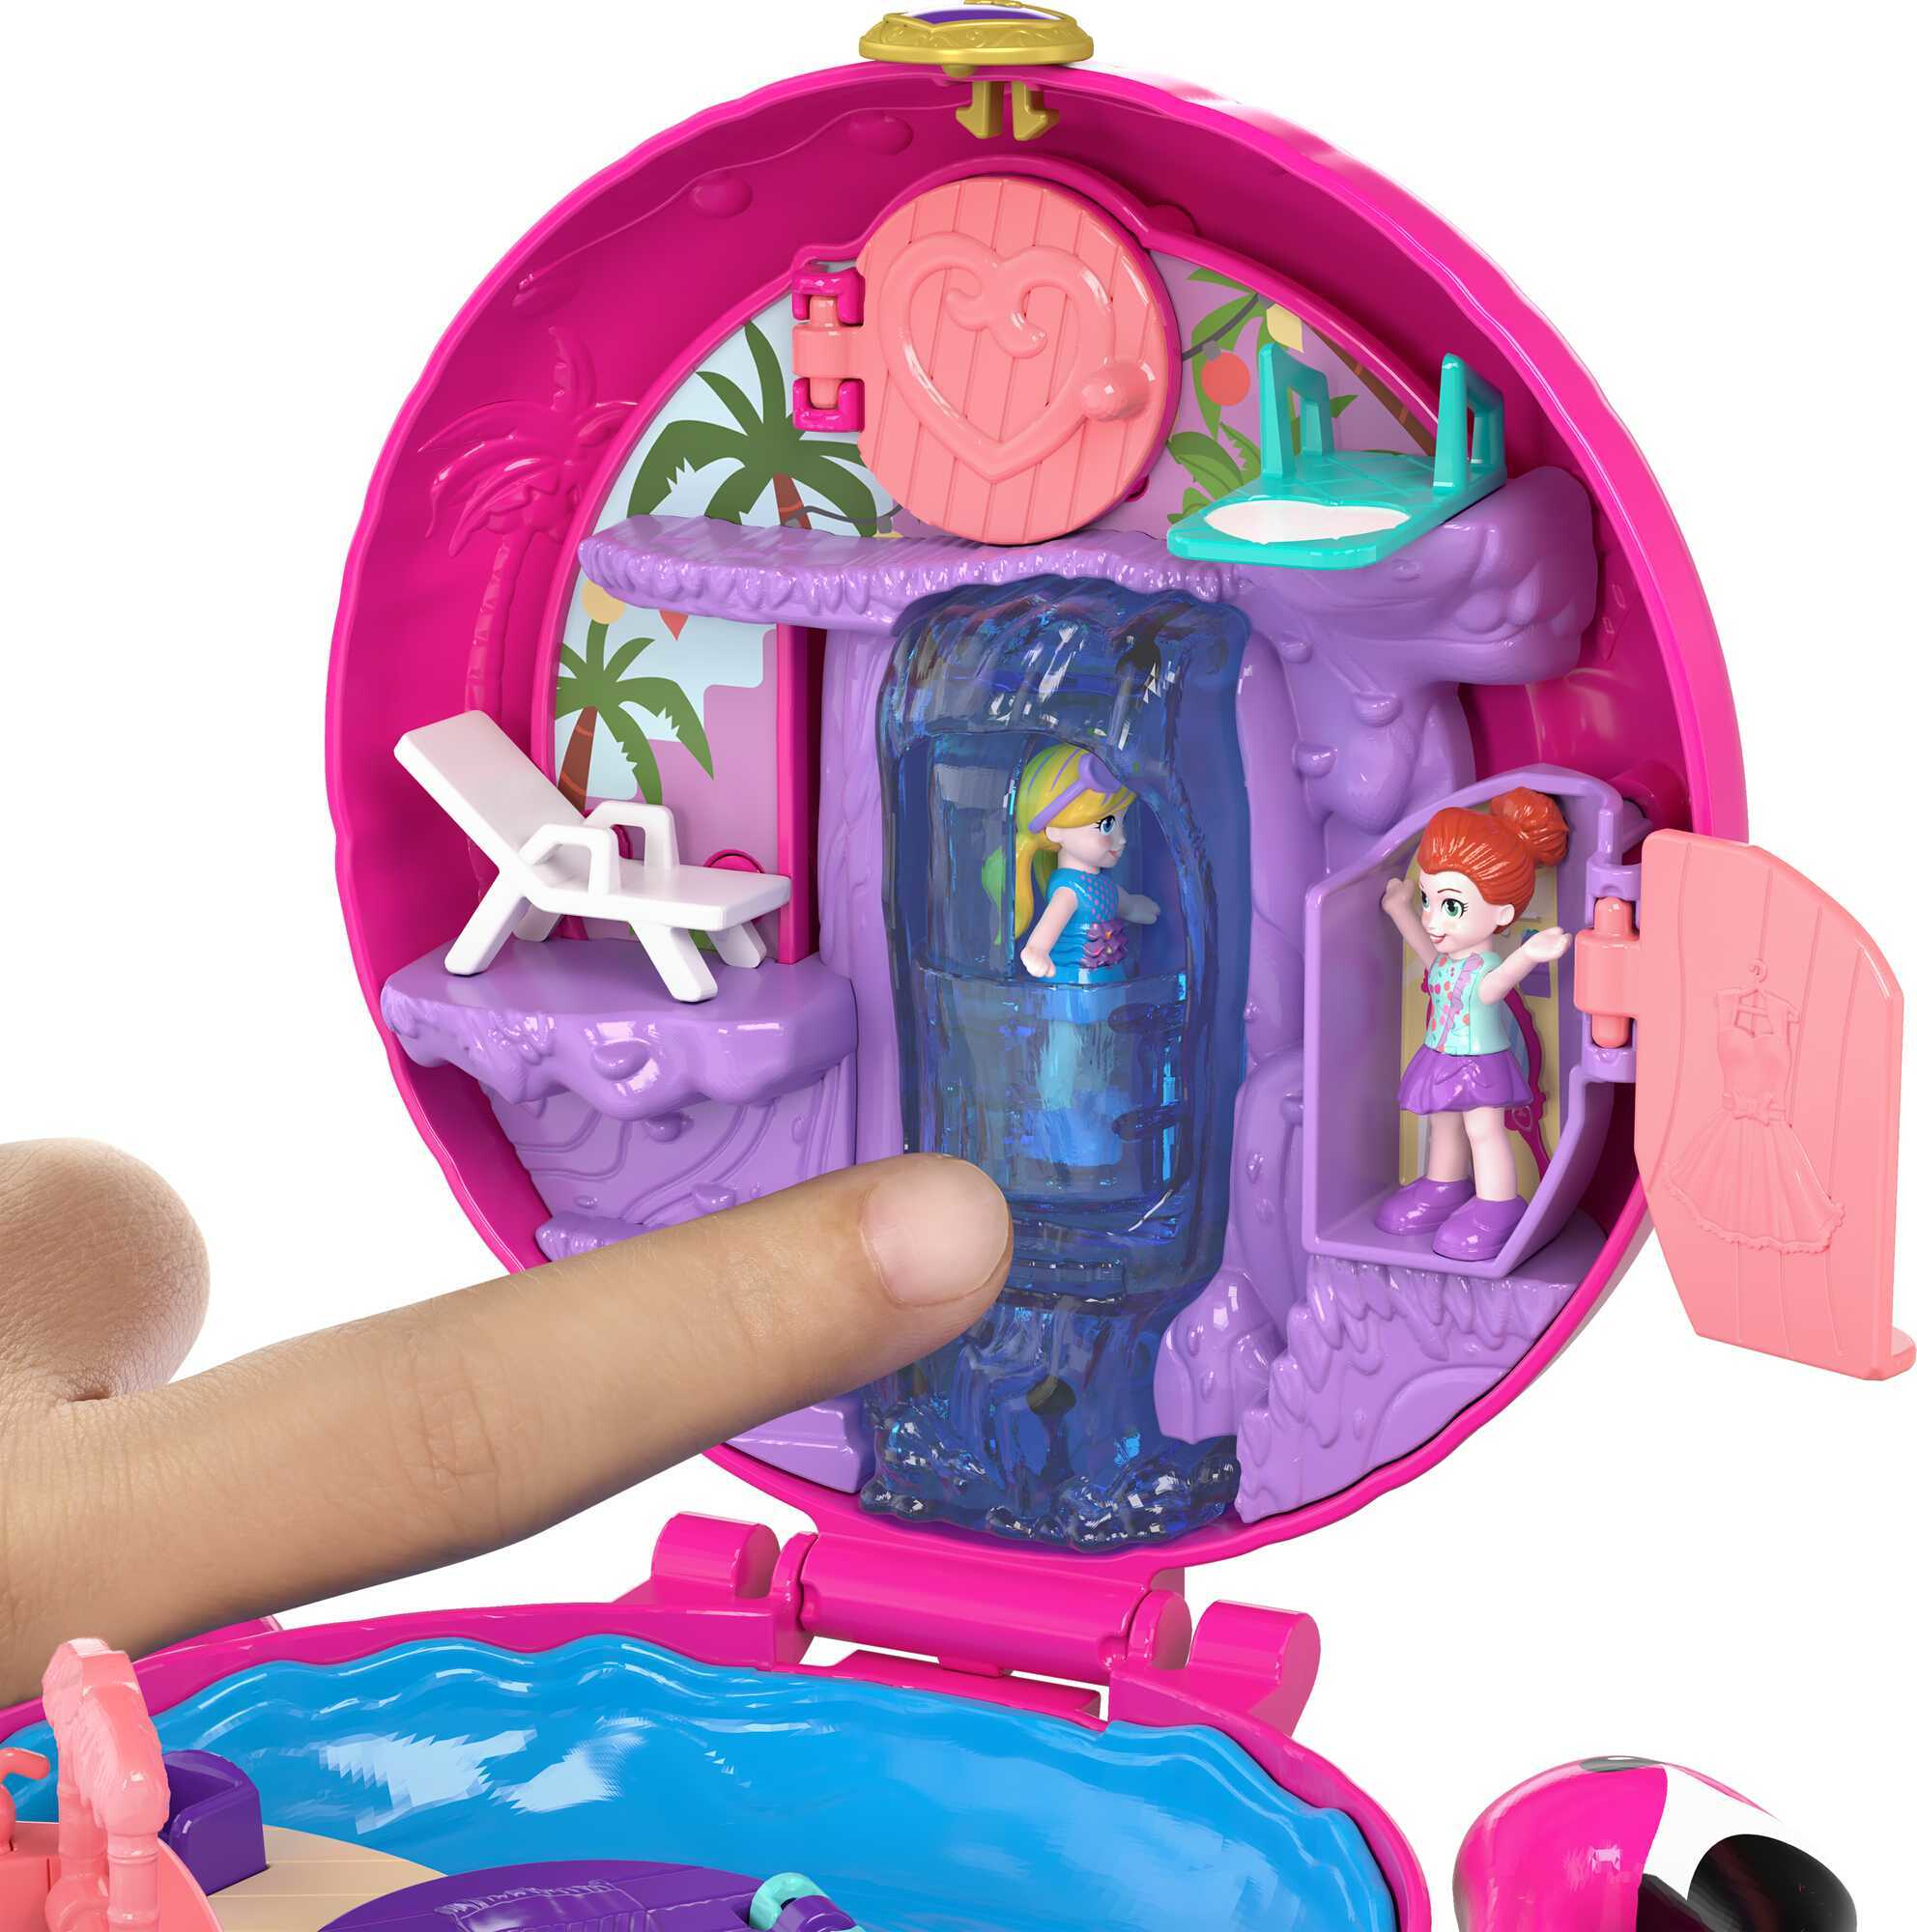 Polly Pocket Mini Toys, Compact Playset and 2 Dolls, Flamingo Floatie - image 4 of 8